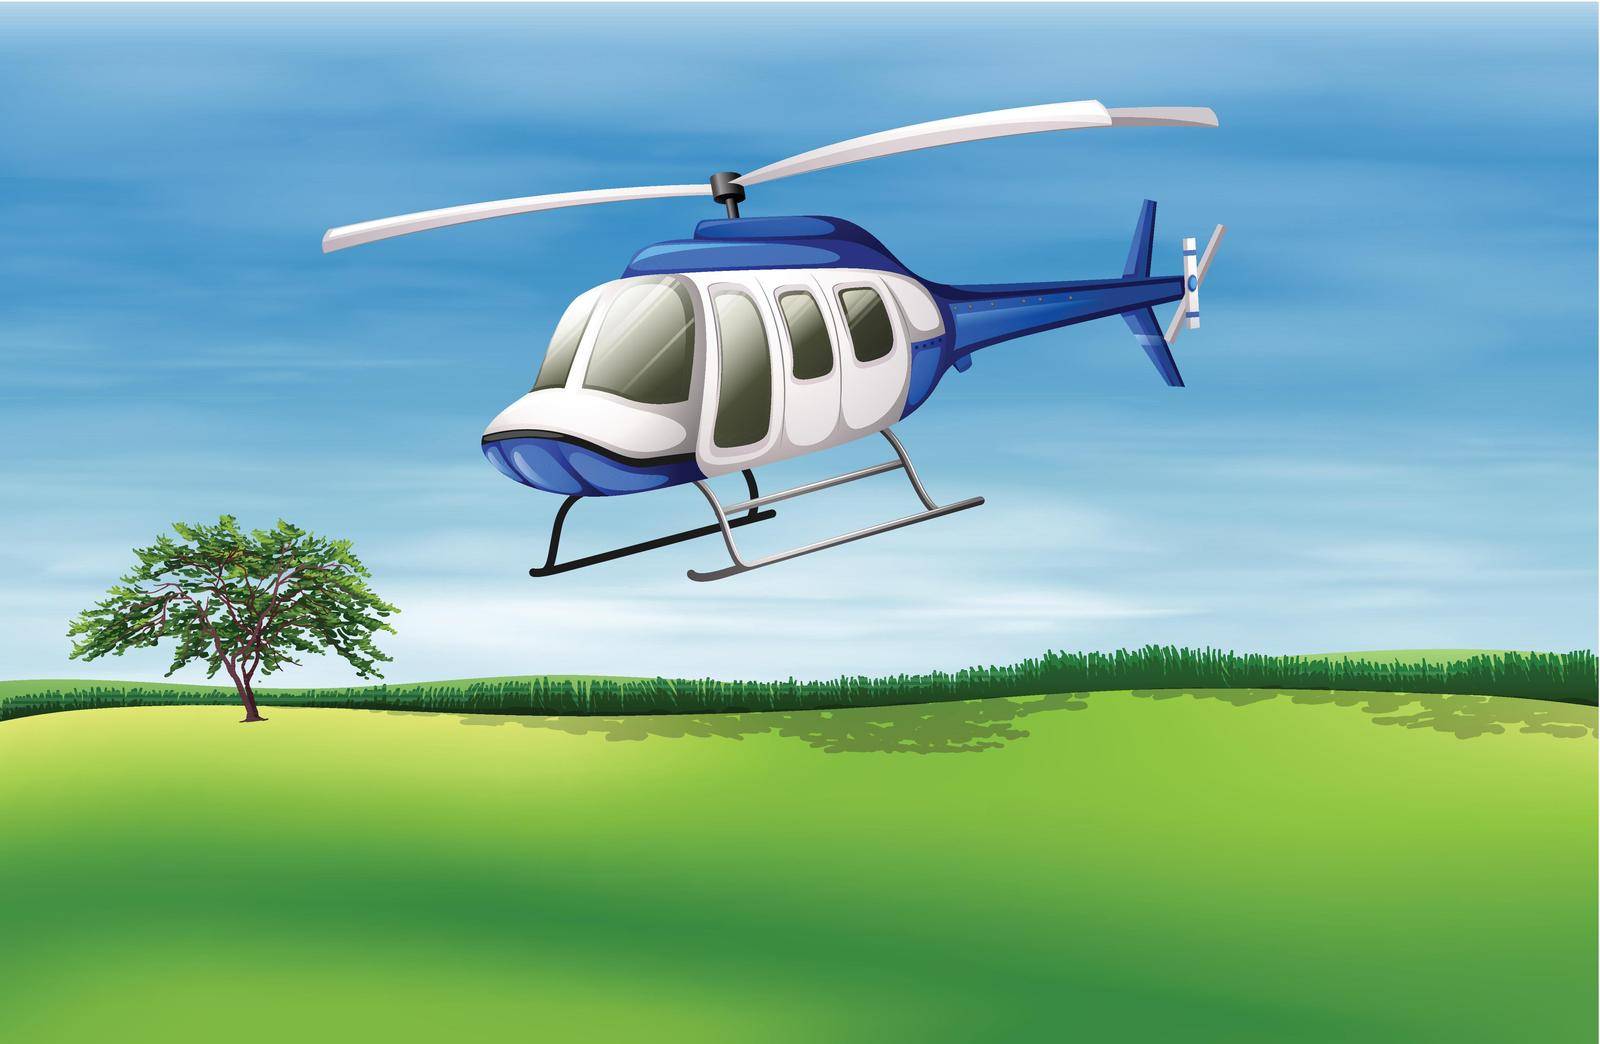 Illustration of a helicopter about to land